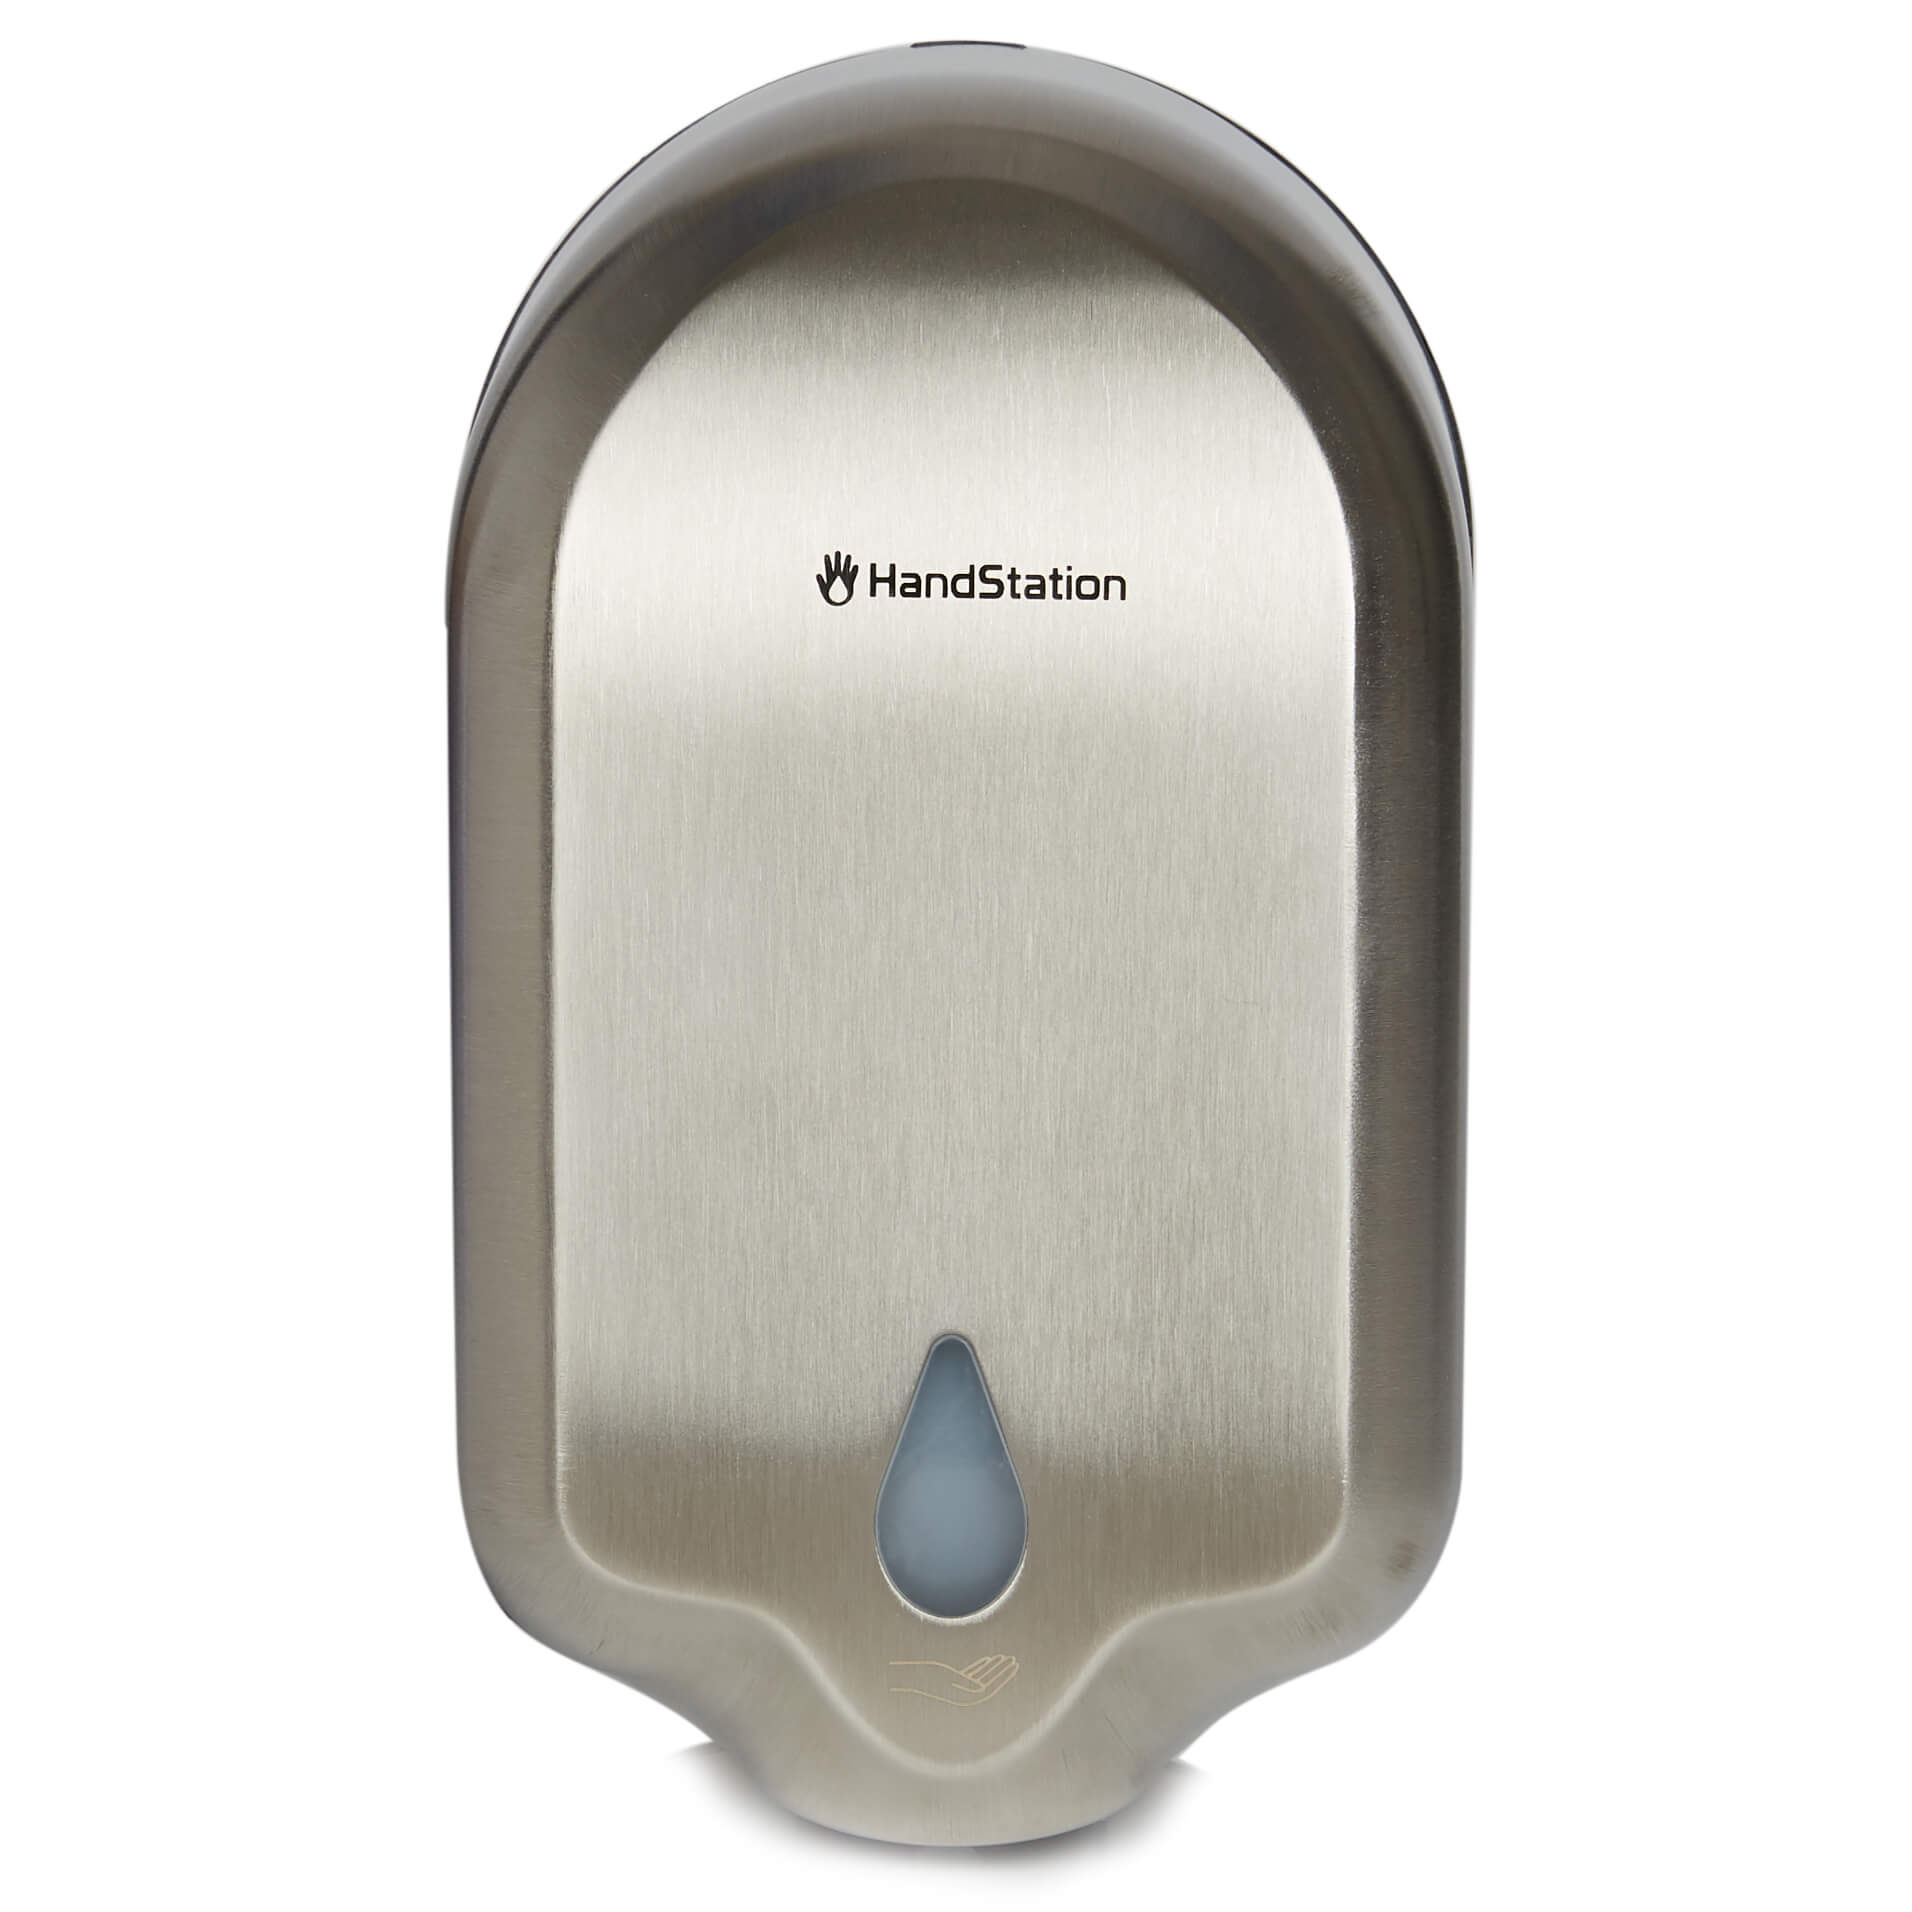 HandStation Eco Stainless Steel Wall Mounted Automatic Touch Free Hand Sanitiser System – Liquid Dispenser